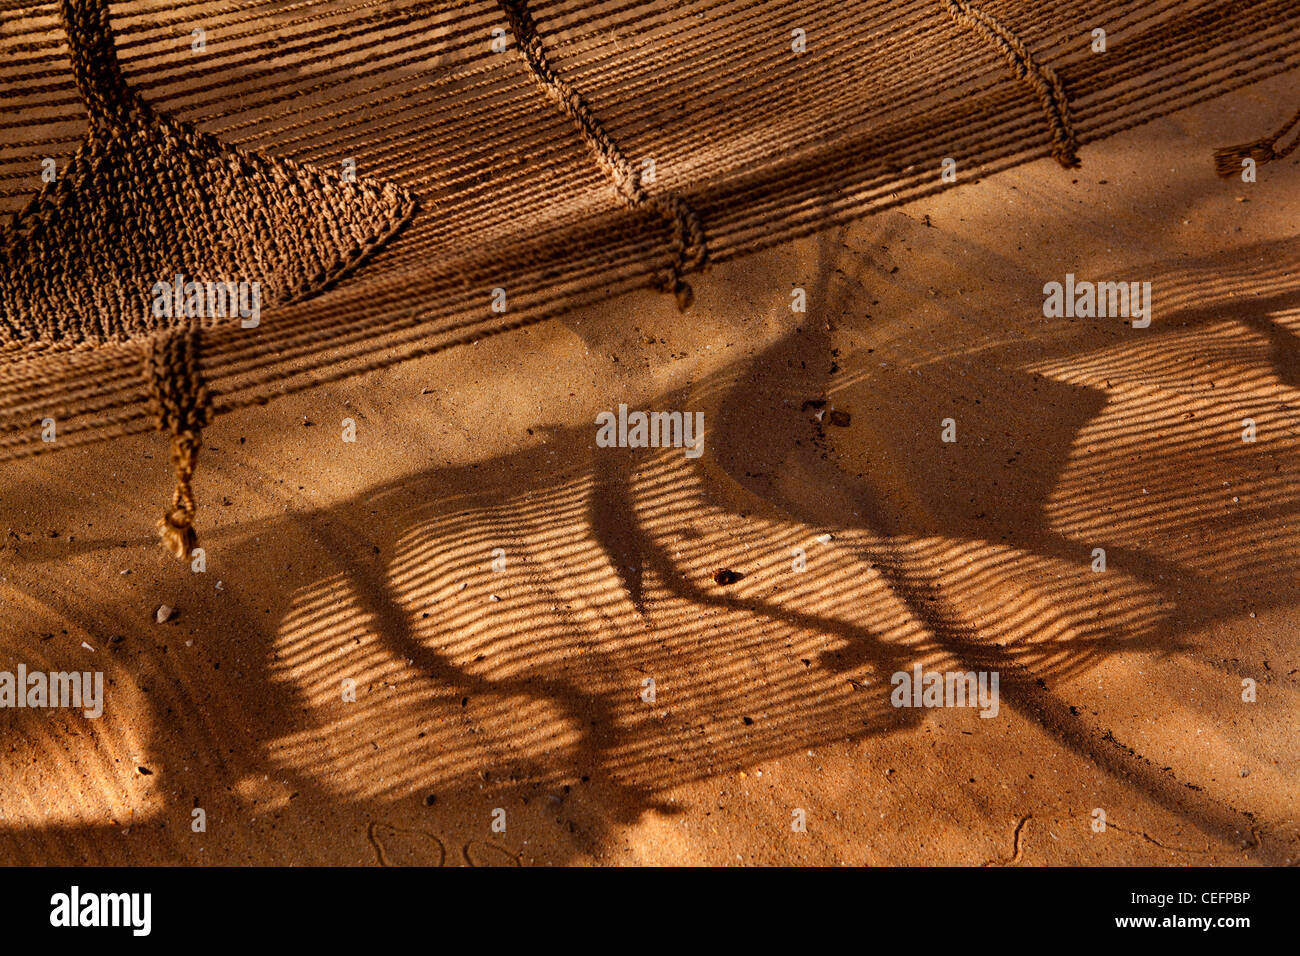 Hammock & shadows on the sand. The Tama Lodge, a luxury hotel in Mbour, Senegal. Stock Photo